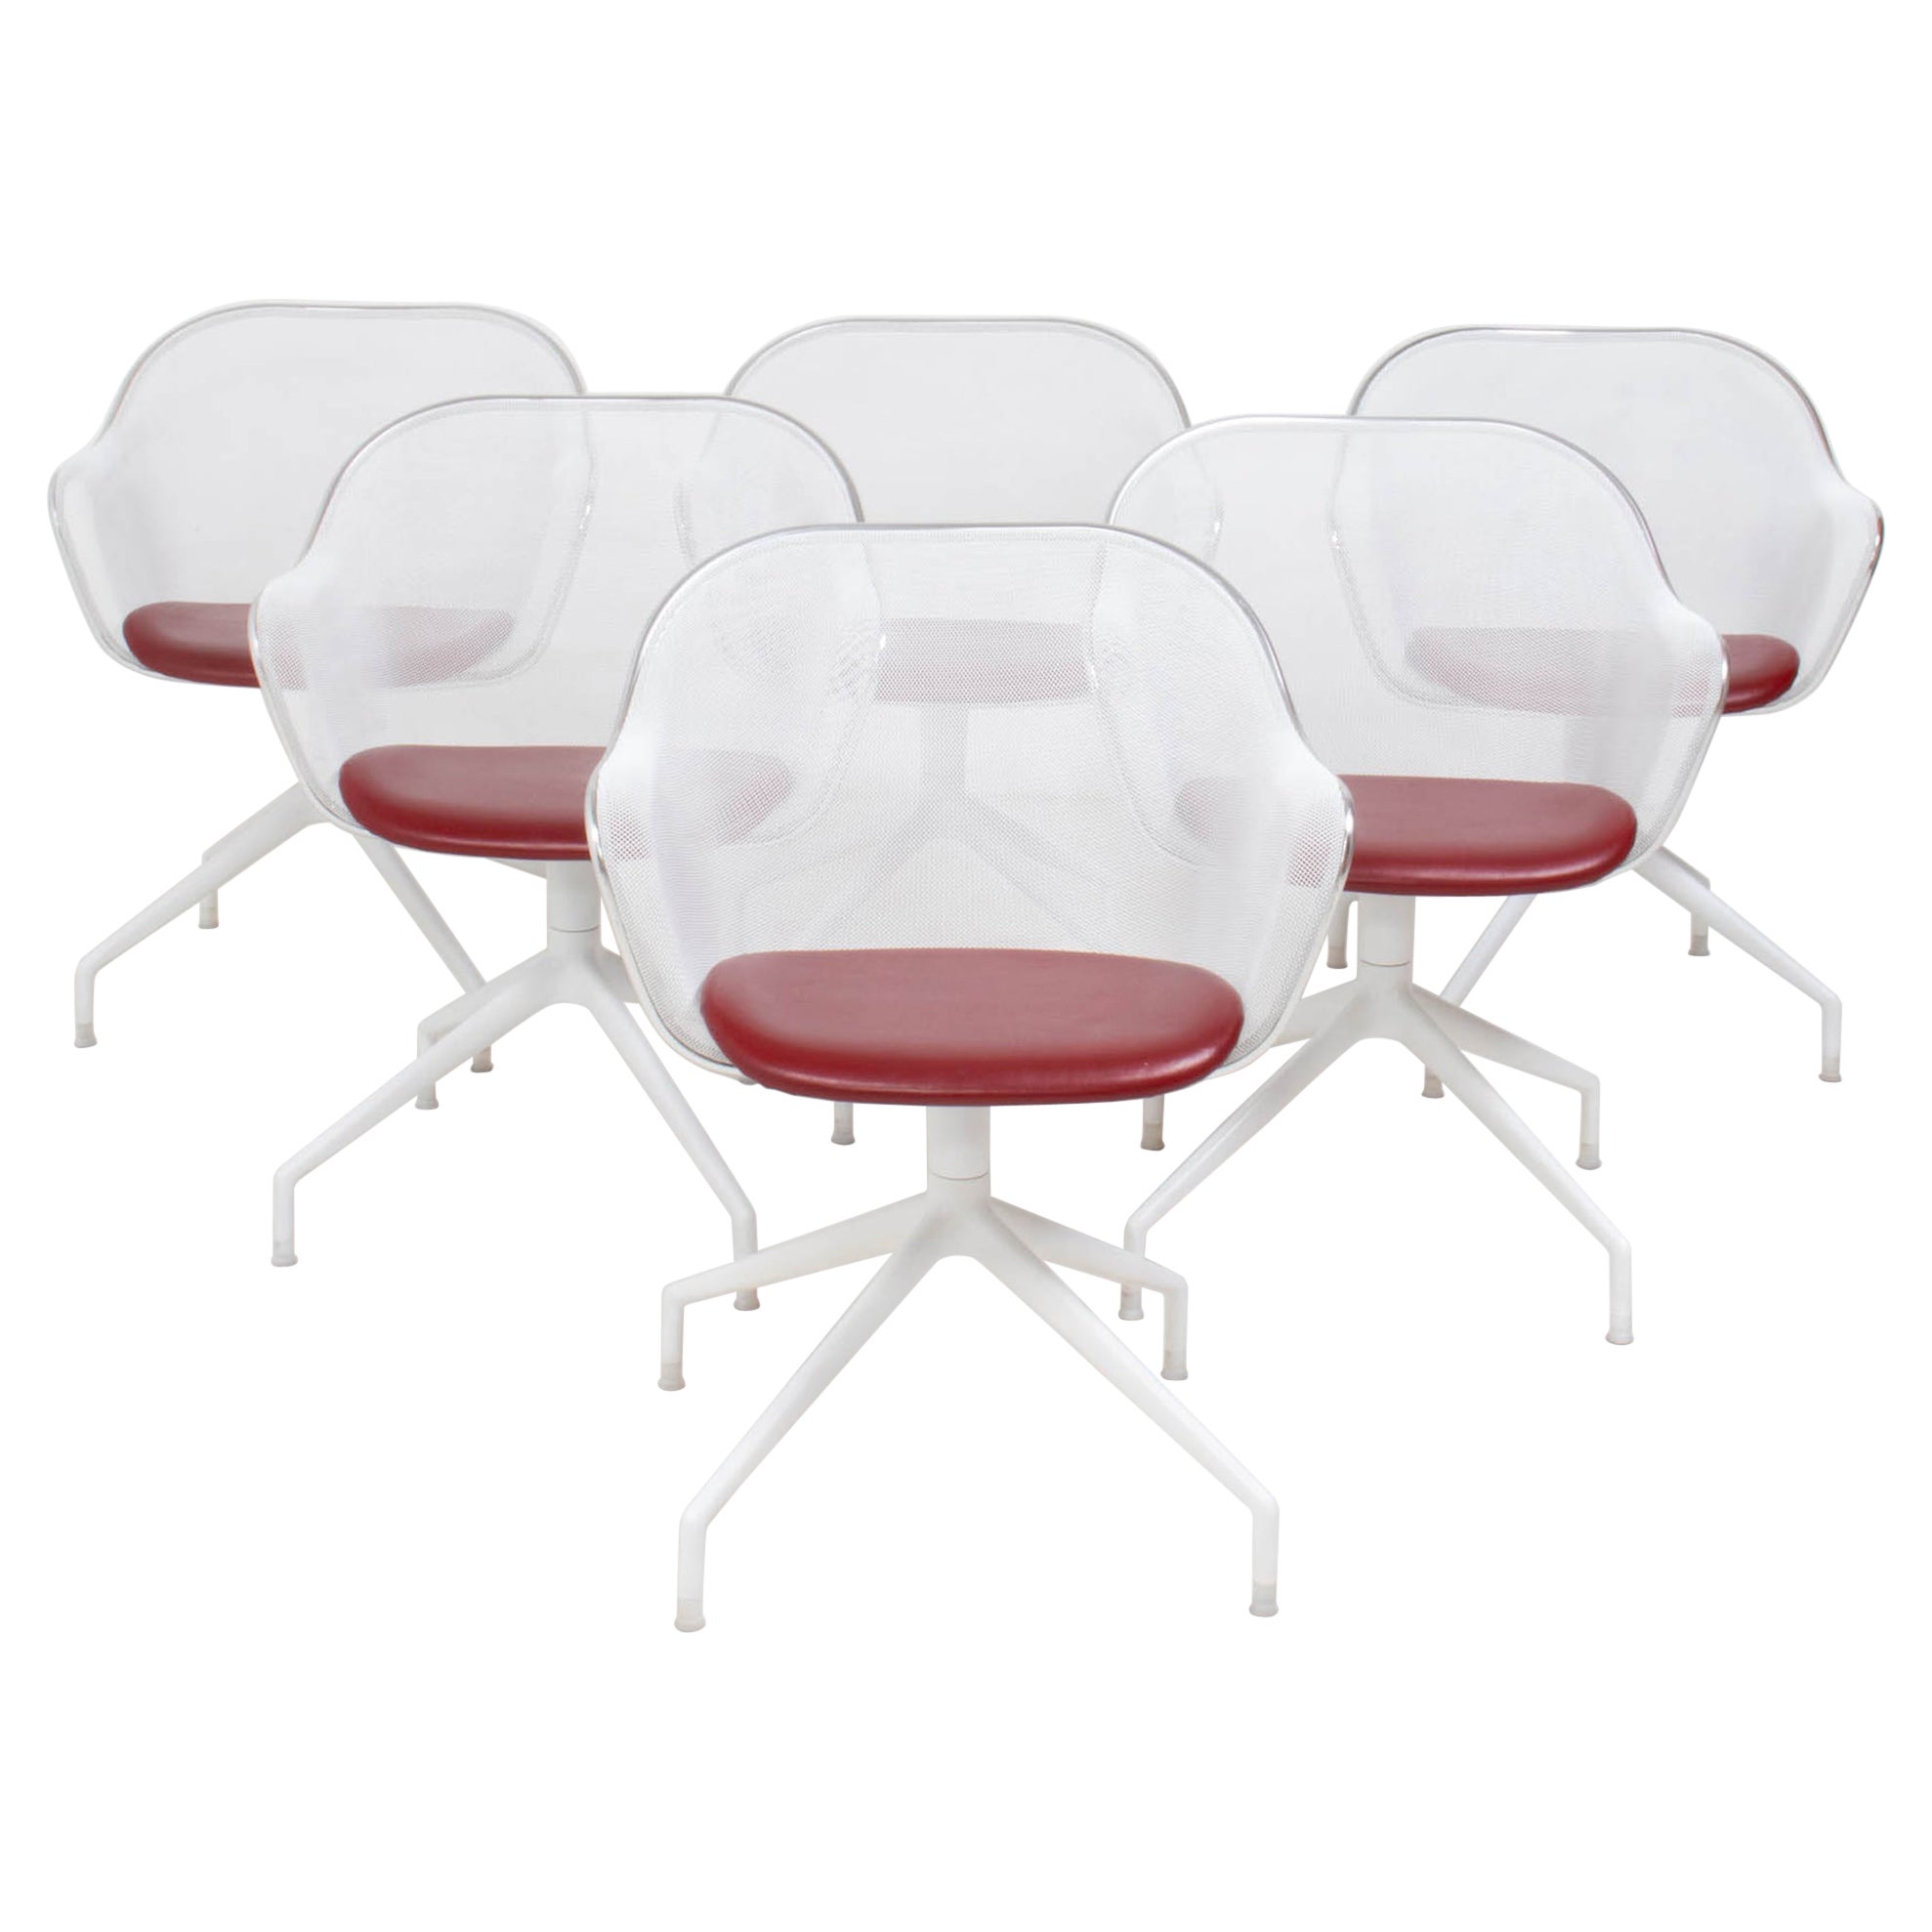 B&B Italia by Antonio Citterio Luta White and Red Leather Swivel Dining Chairs For Sale